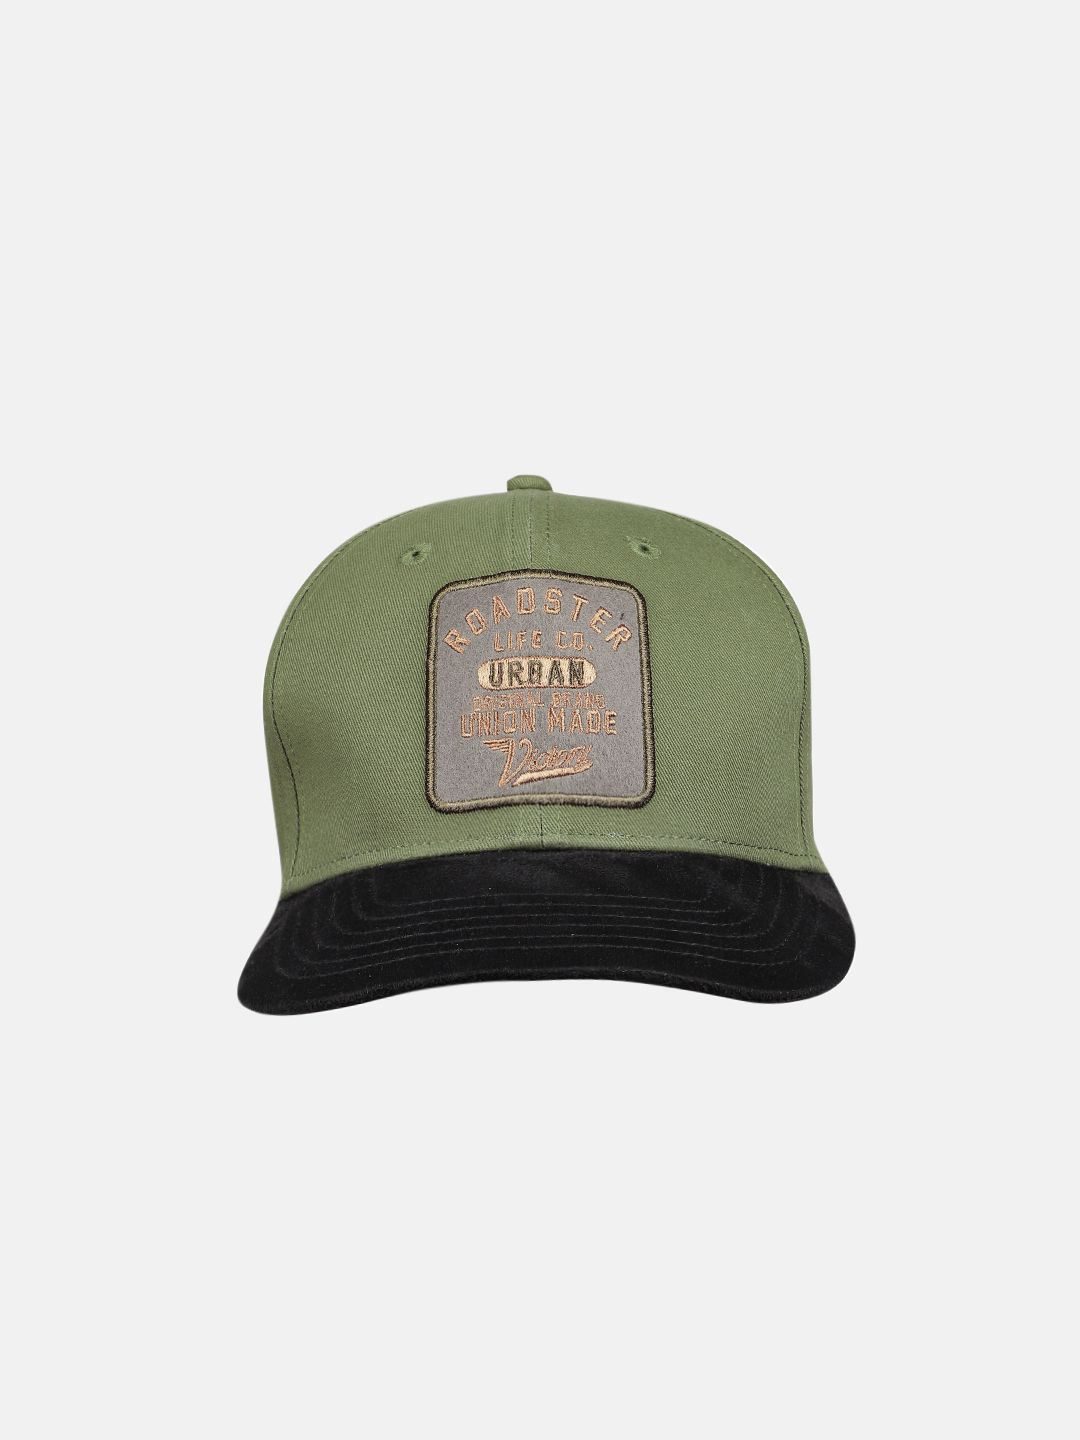 Roadster Unisex Olive Green Embroidered Snapback Cap Price in India